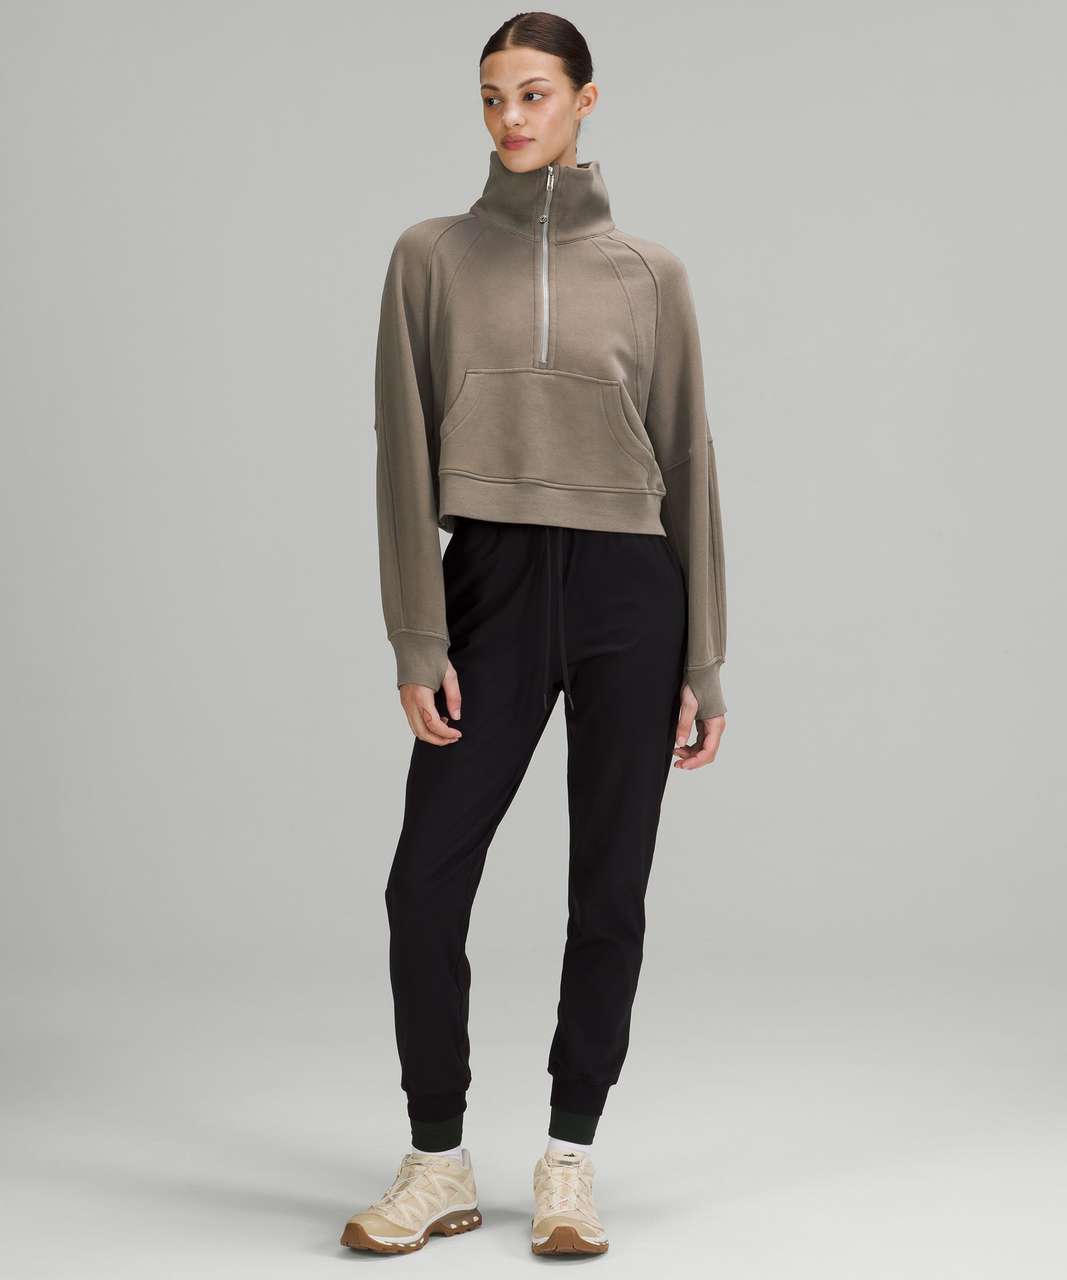 restock][US] Scuba Oversized Funnel Neck Half Zip in Trench, size XS/S and  M/L : r/lululemon